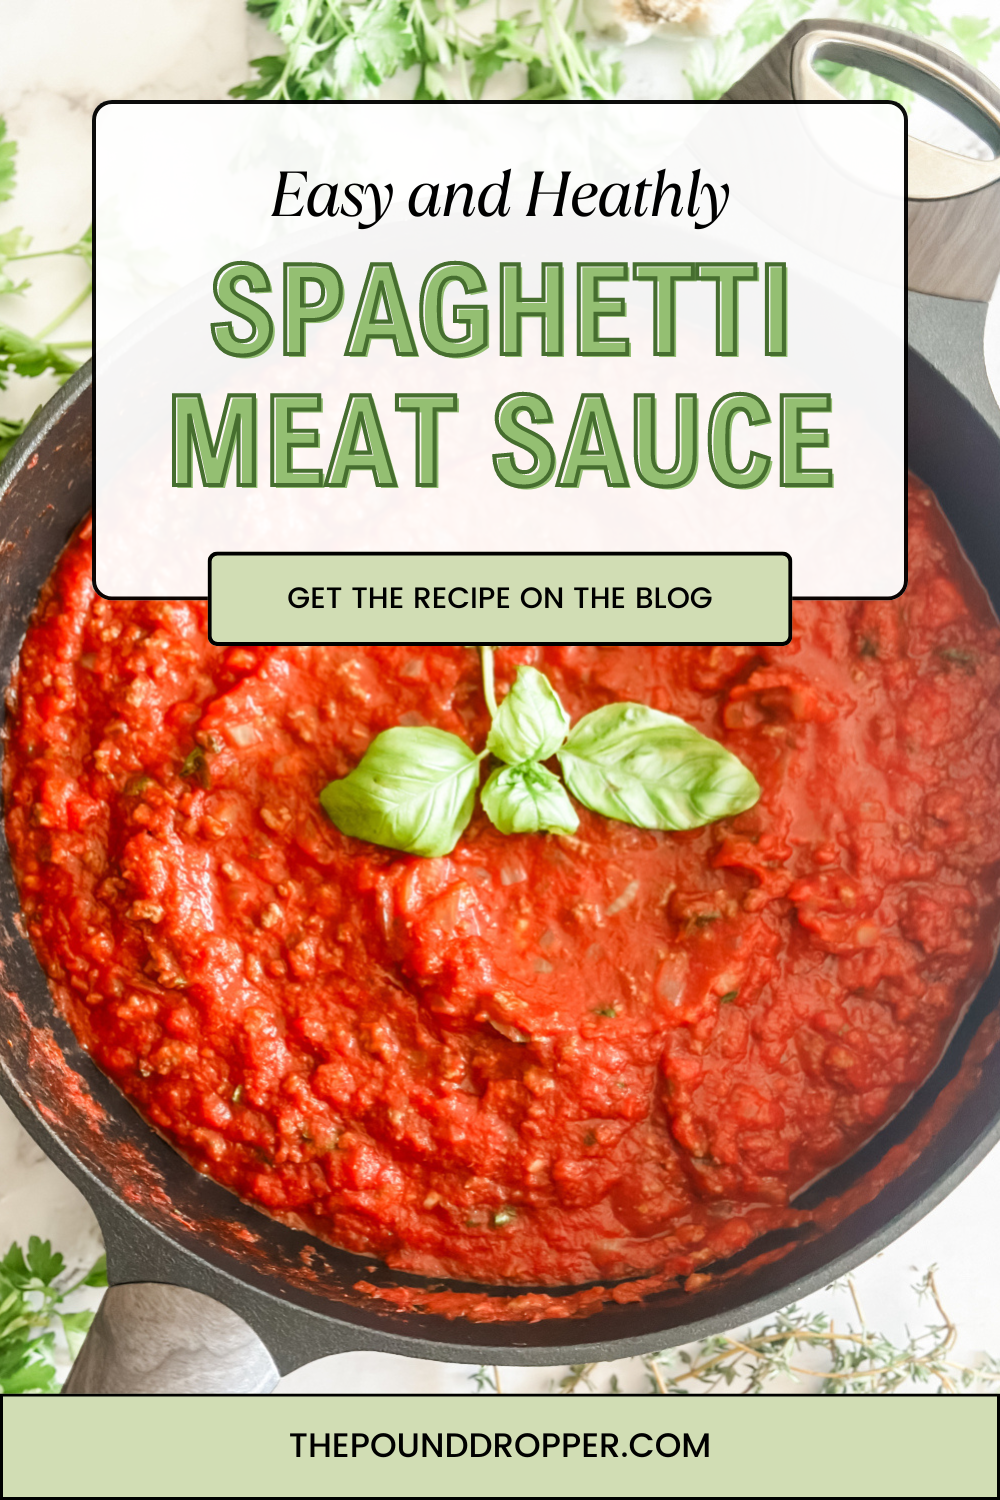 This Easy Healthy Spaghetti Meat Sauce recipe is packed with fresh Italian flavors-with fresh herbs and spices. It’s meaty, thick, and incredibly delicious. This is great served over traditional pasta, protein pasta, or spaghetti squash for a healthy protein packed, low-carb meal.  via @pounddropper